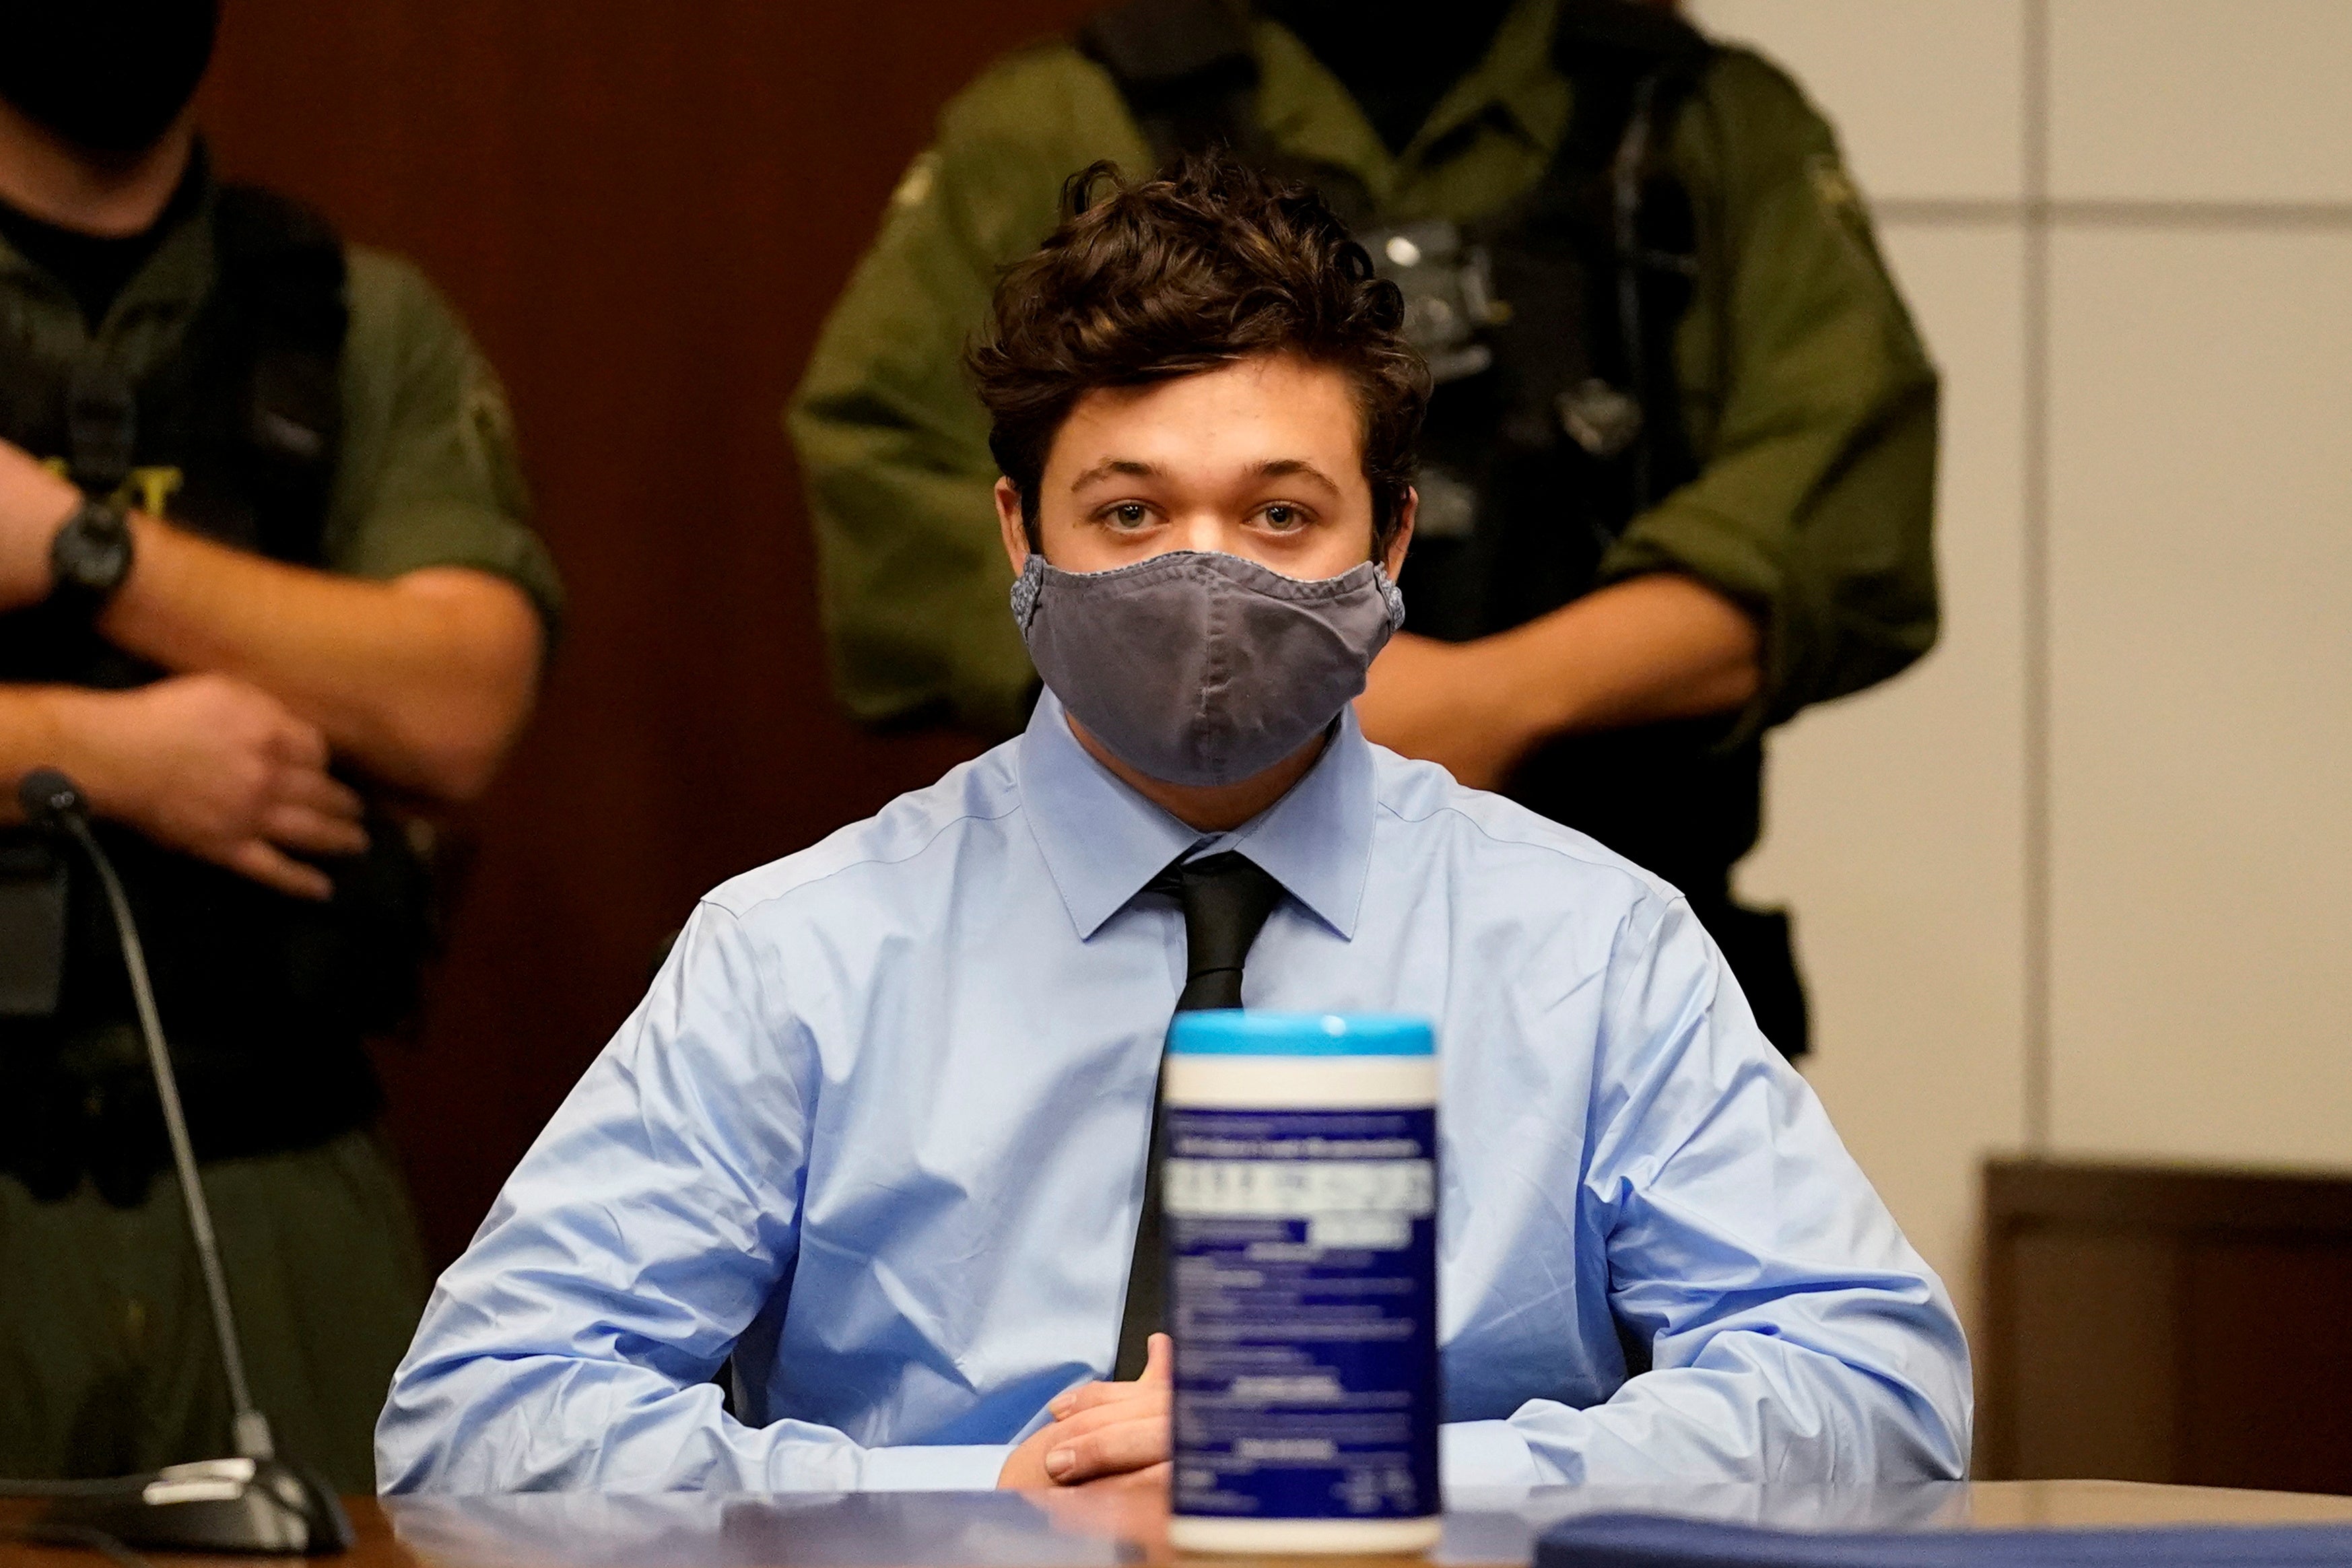 Kyle Rittenhouse, wearing a dress shirt, tie, and mask, sits during a court hearing.